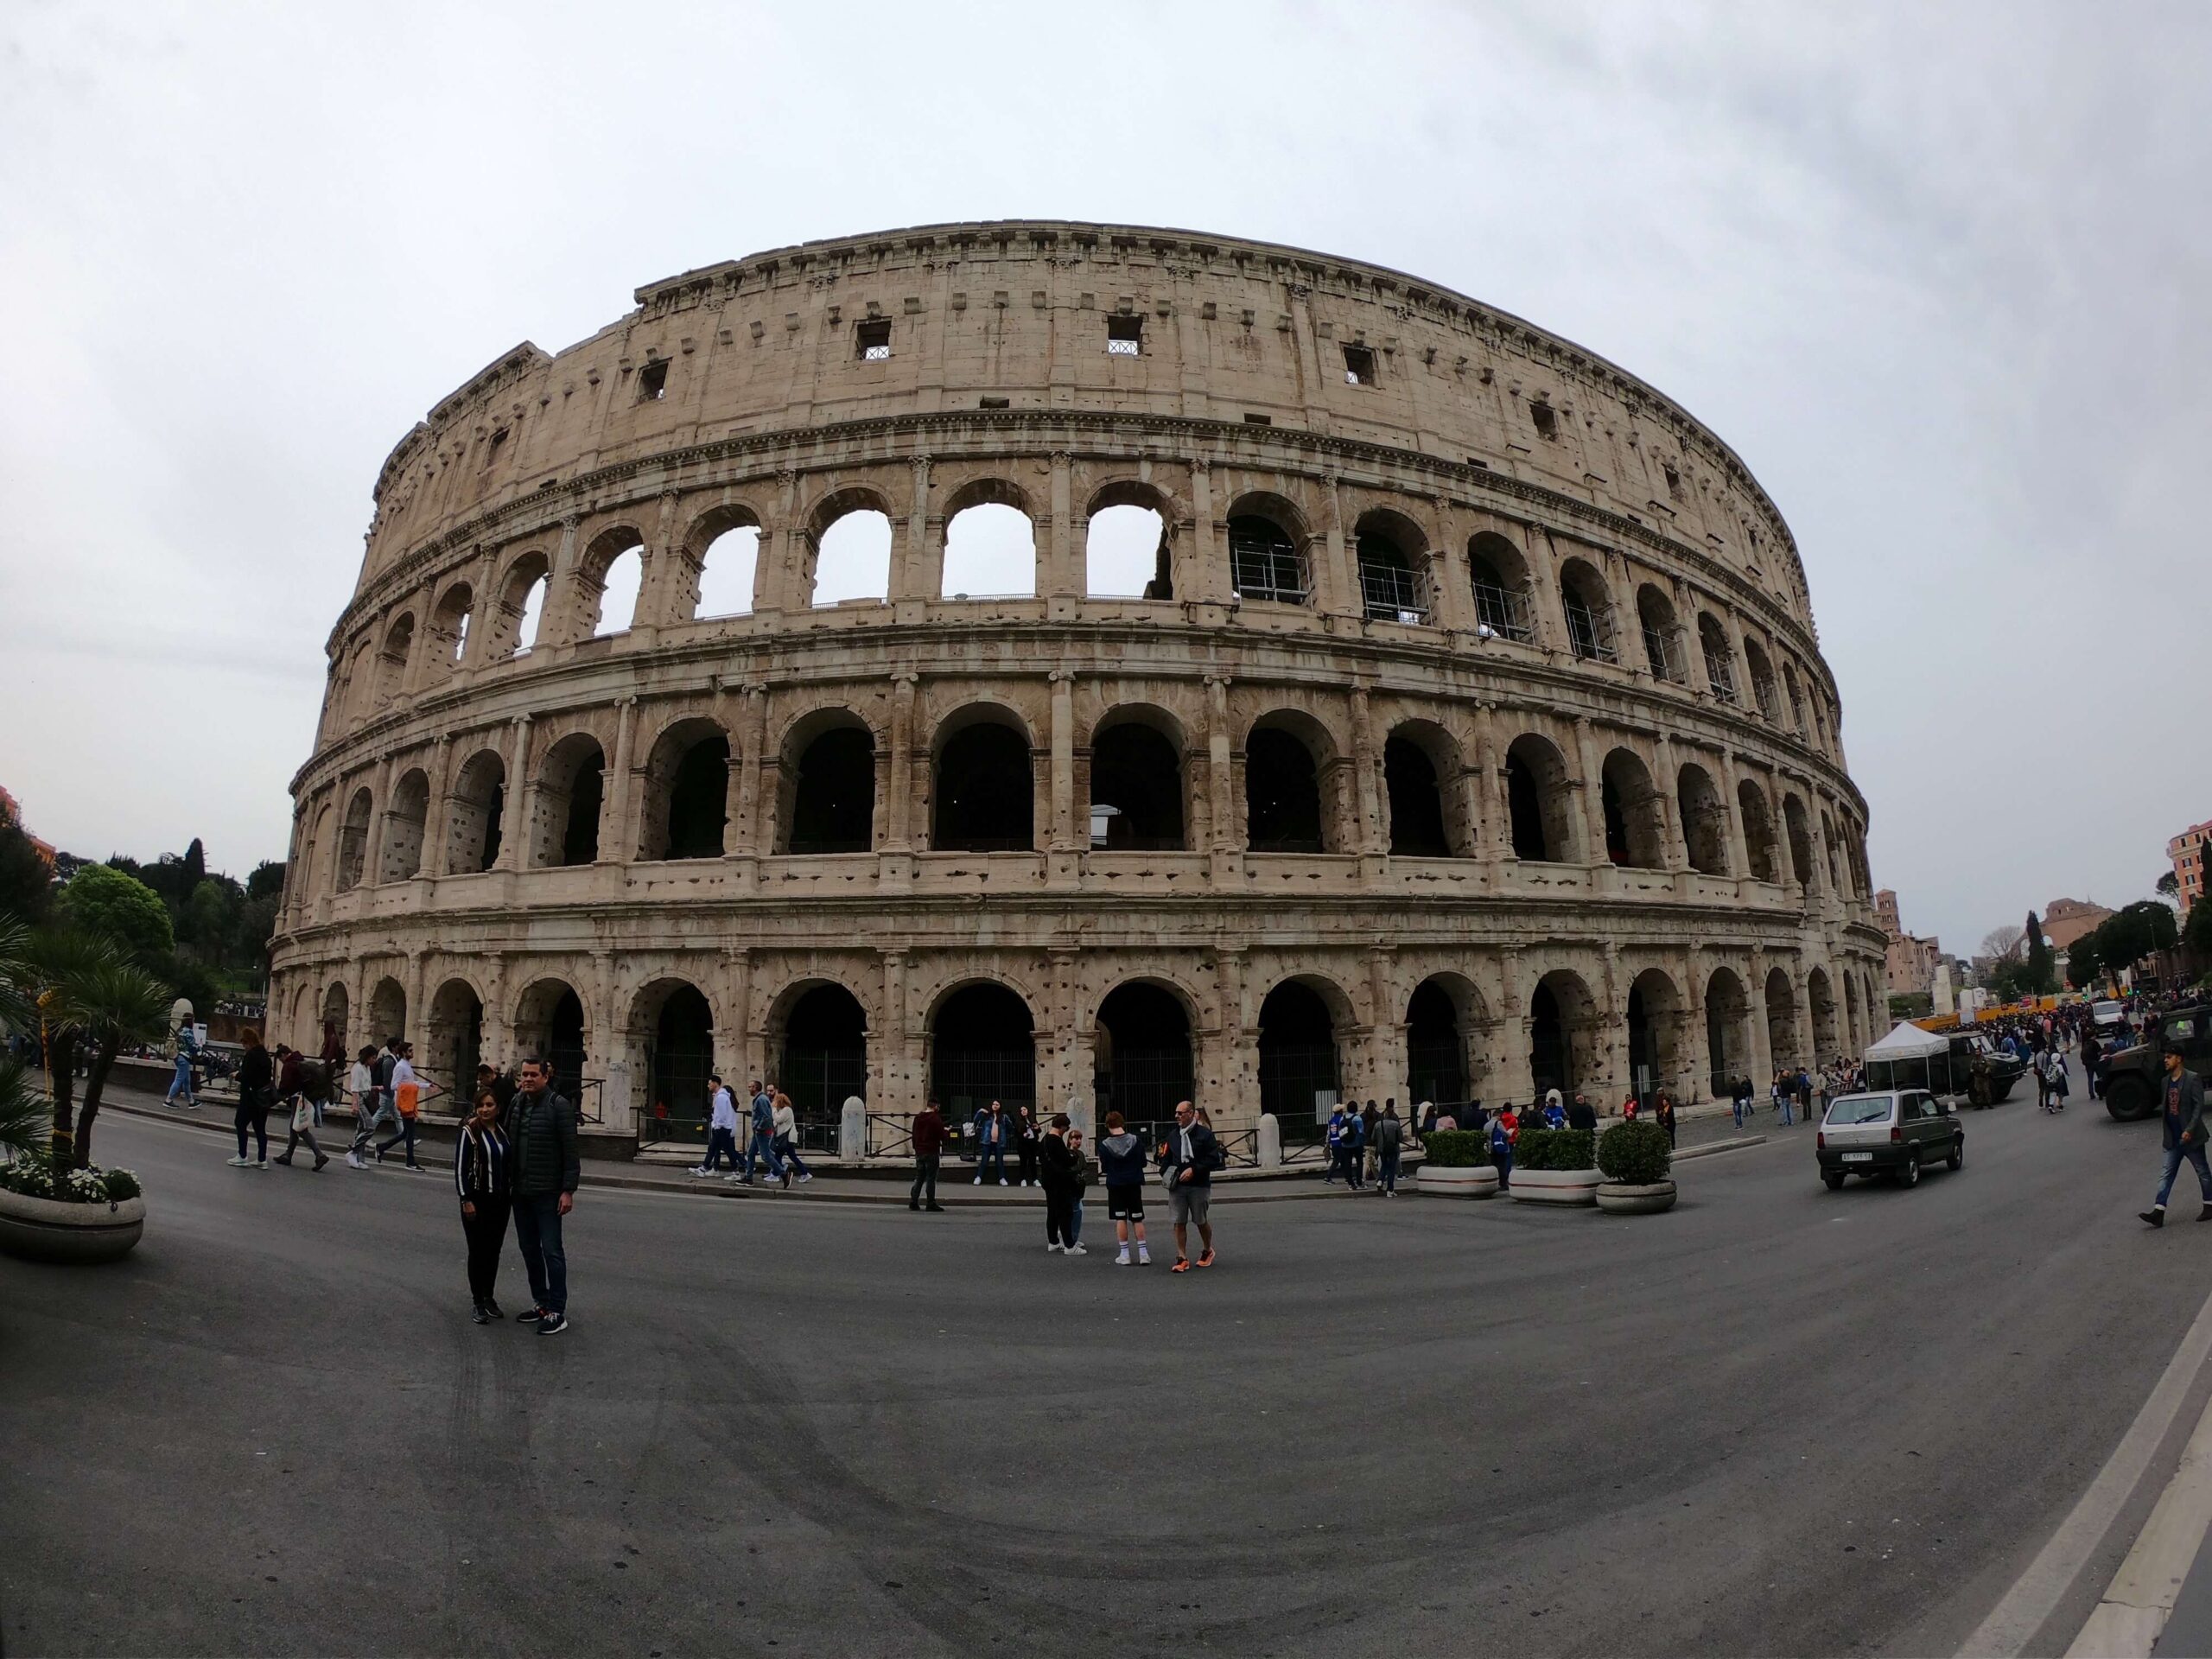 The Colosseum Exterior, Rome, Italy